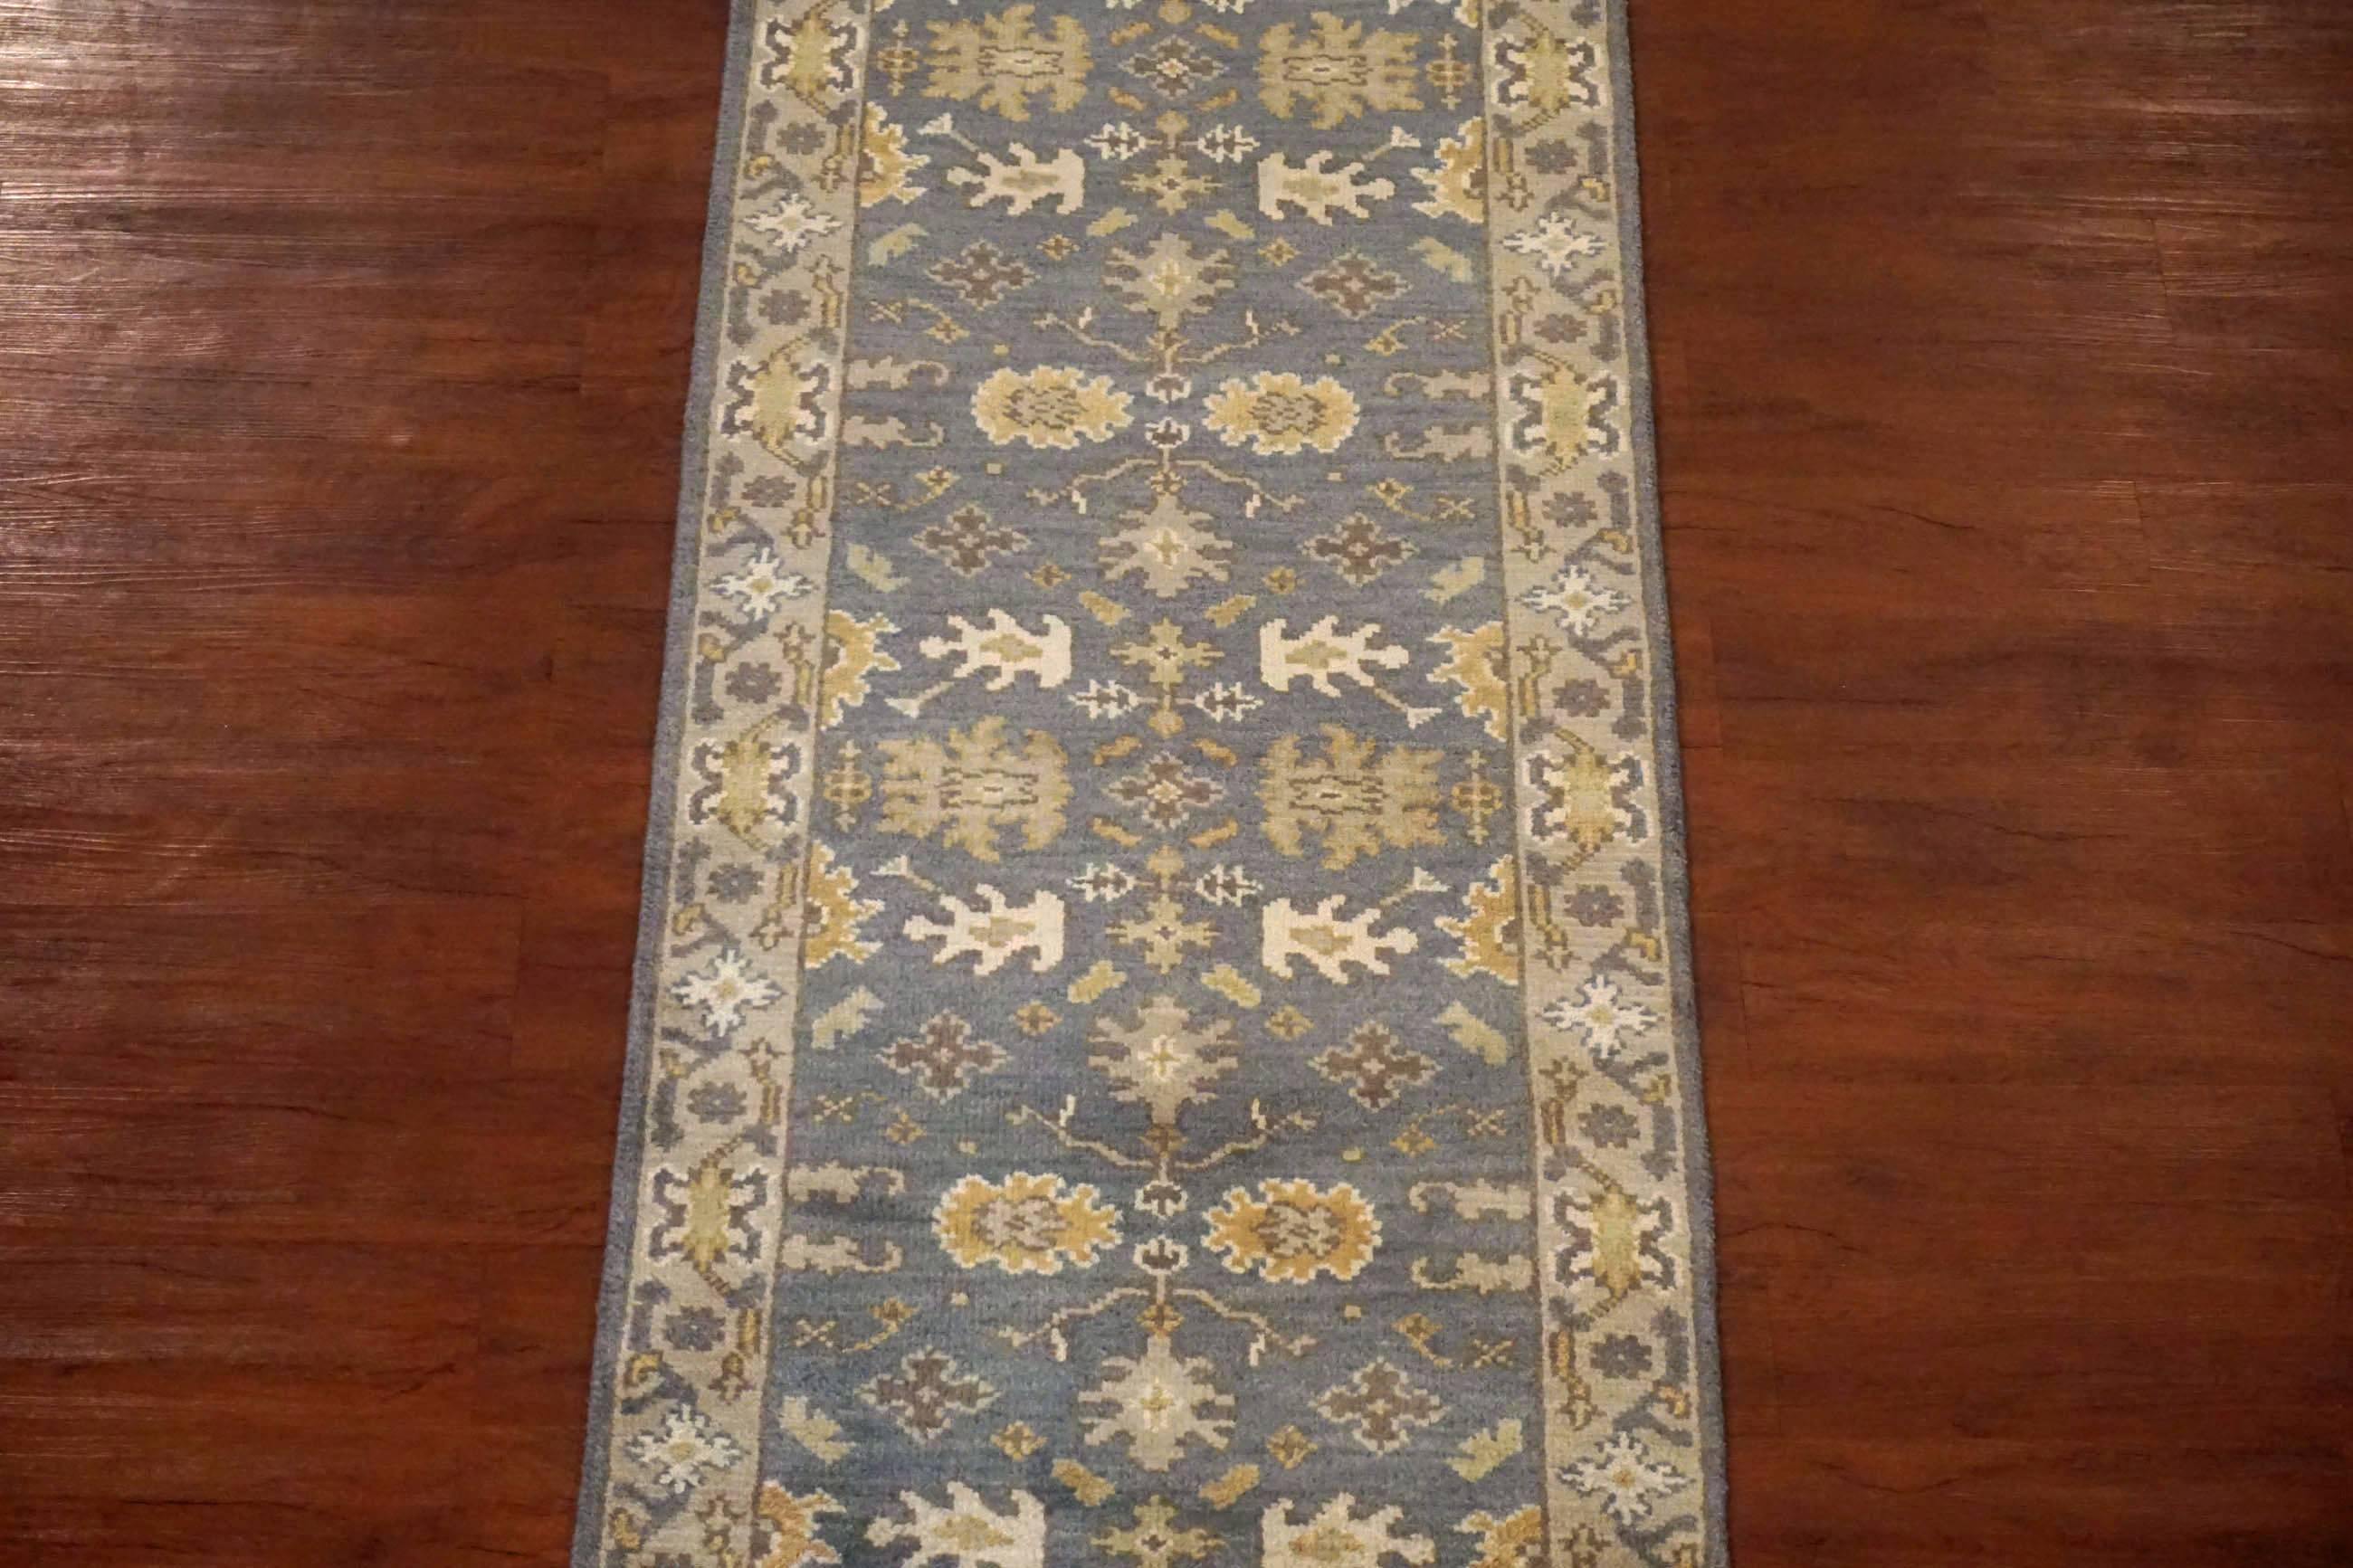 Grey hand-knotted Oushak runner.

2015

Measures: 2'7